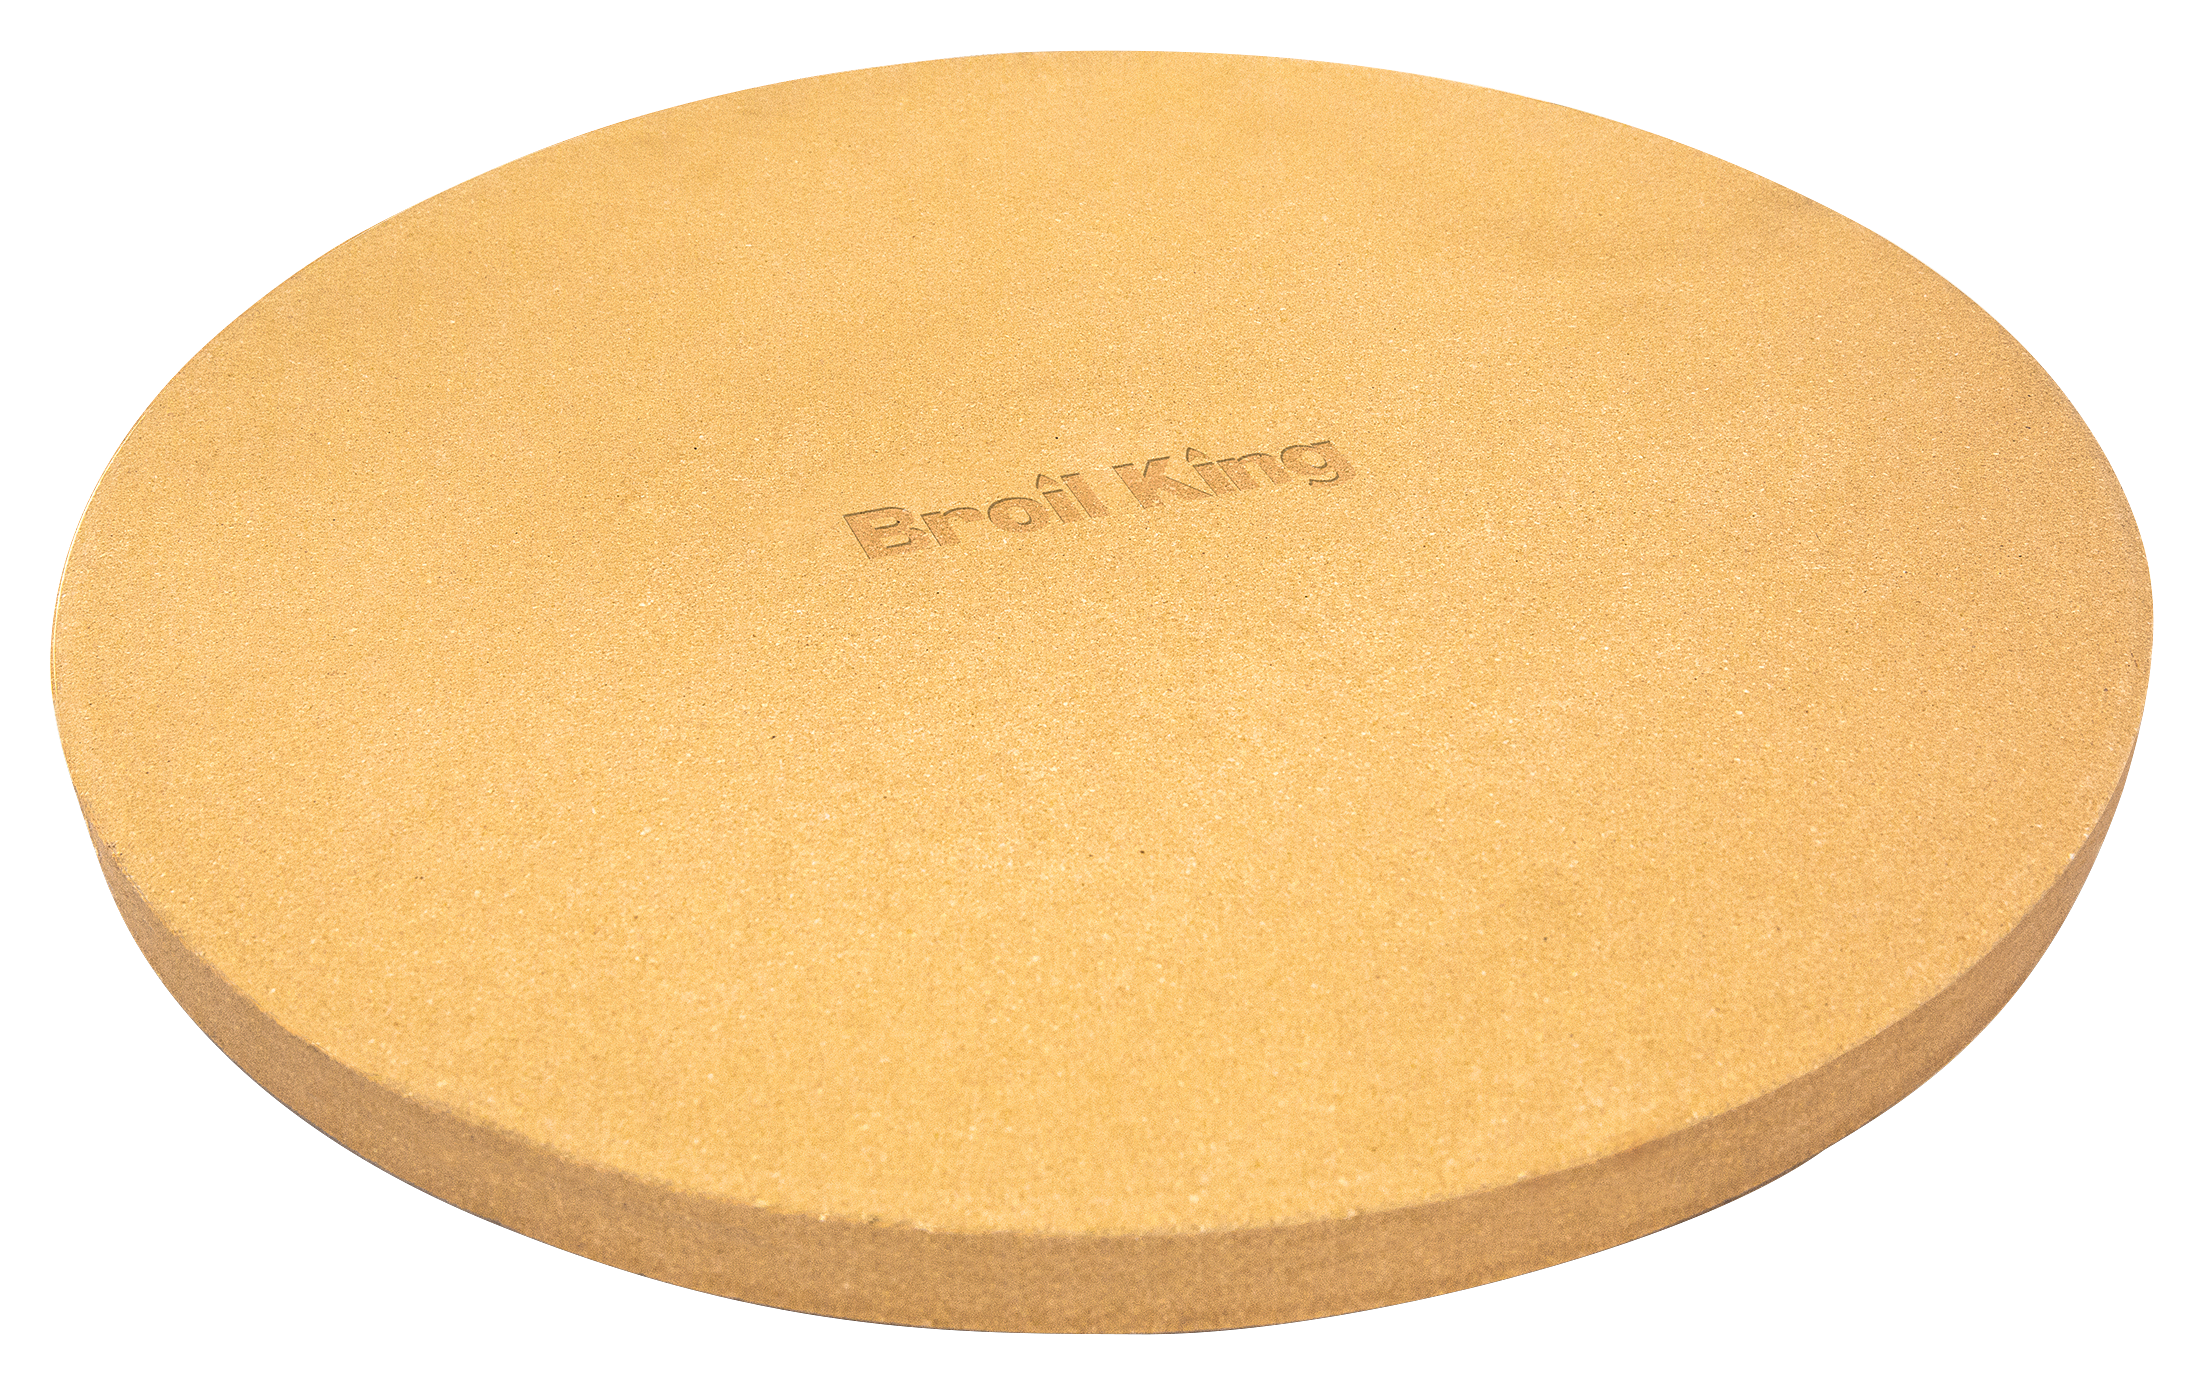 Broil King Extra Thick Grill Pizza Stone